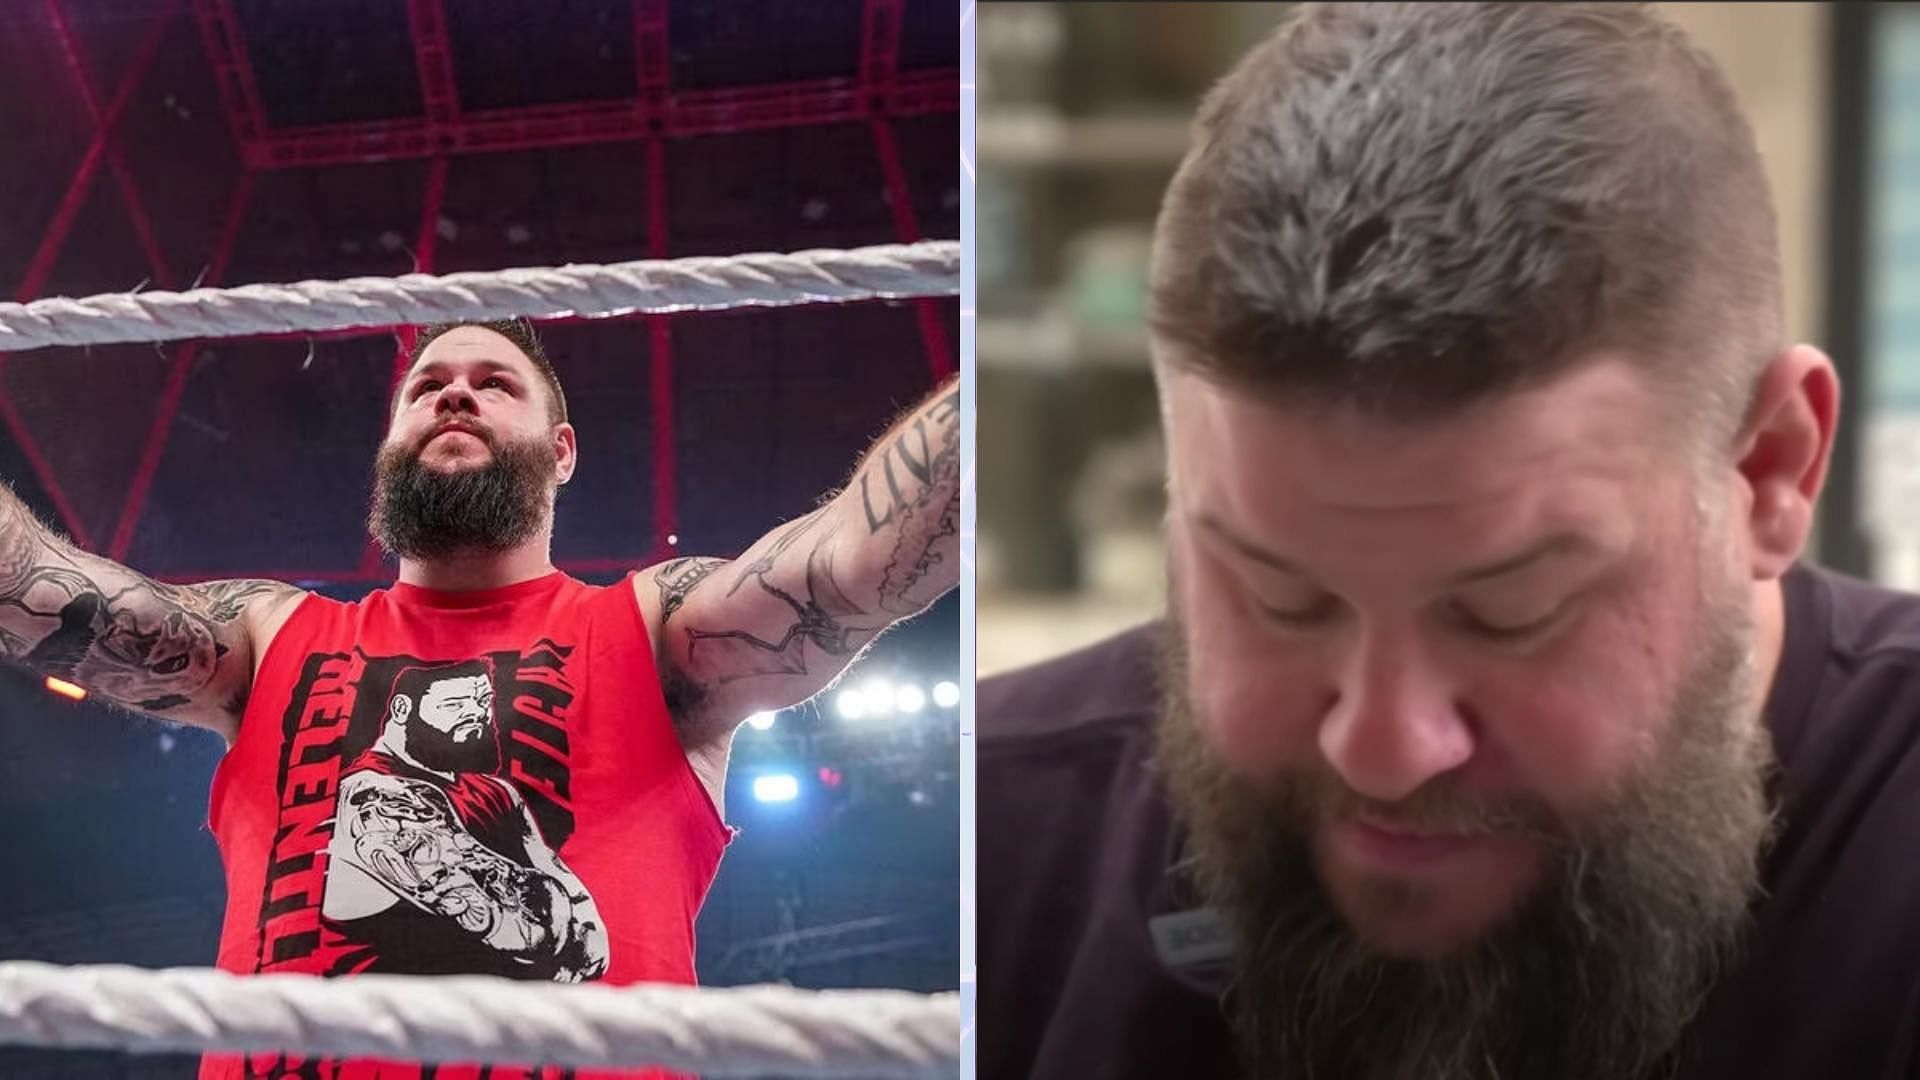 Kevin Owens is a former WWE Universal Champion [Image credits: wwe.com and WWE